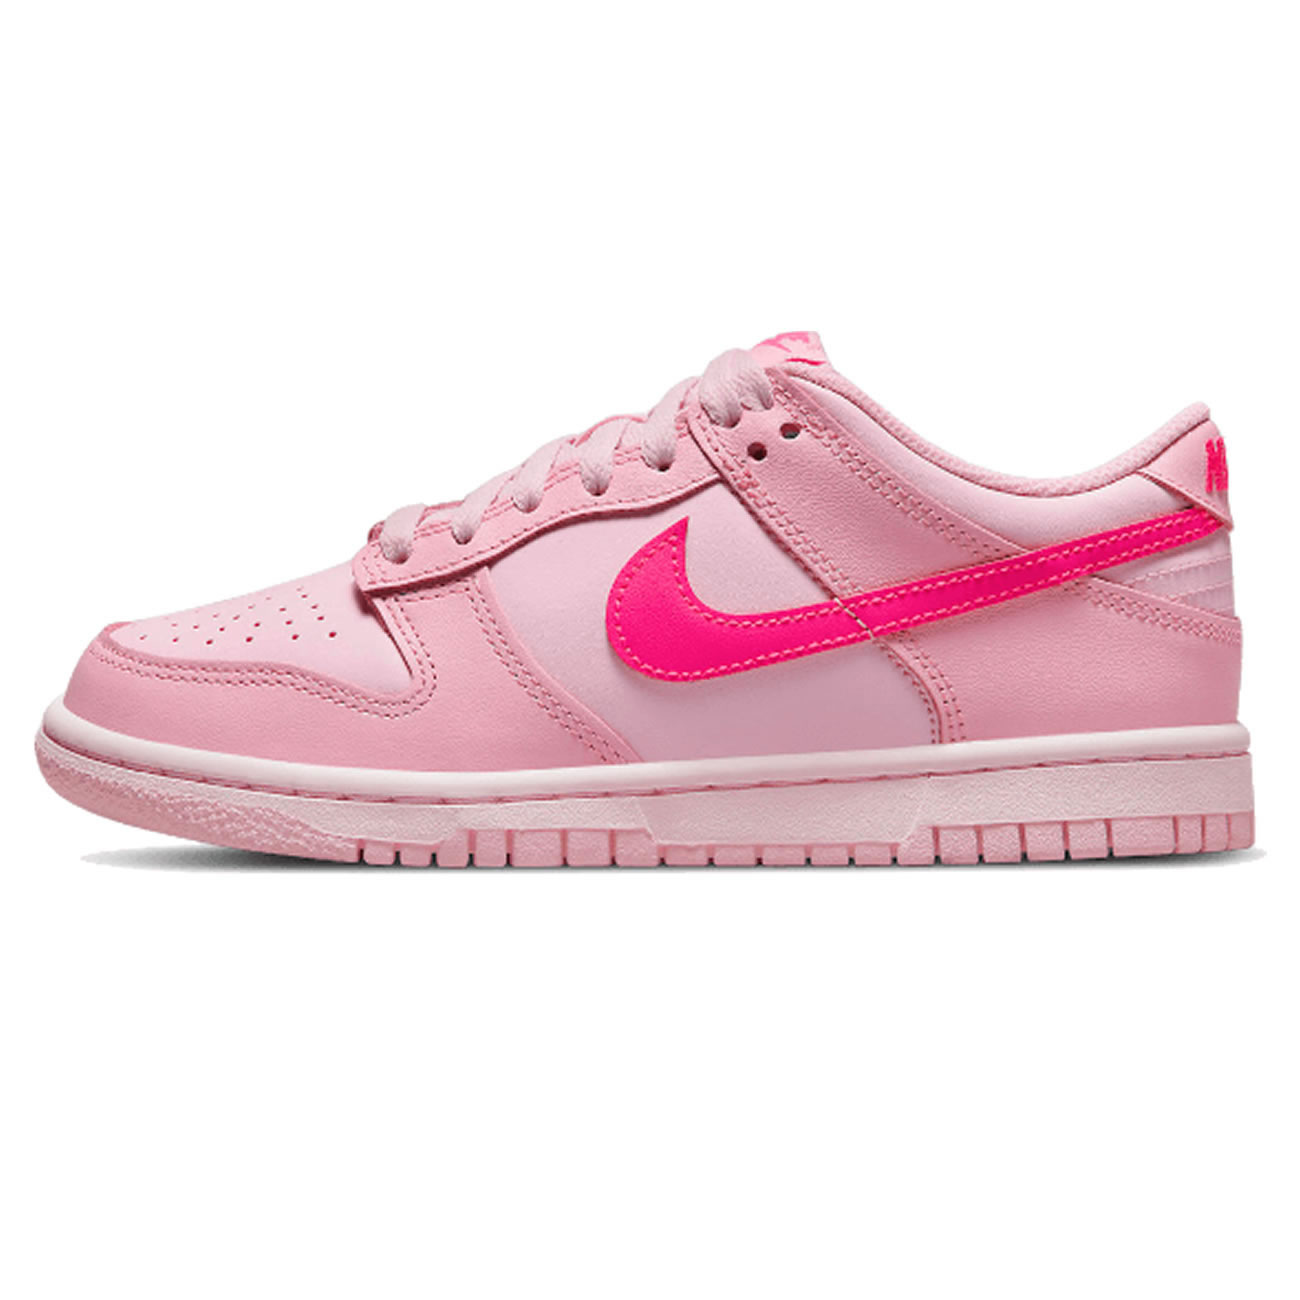 Nike Dunk Low Triple Pink Gs Dh9765 600 (1) - newkick.org